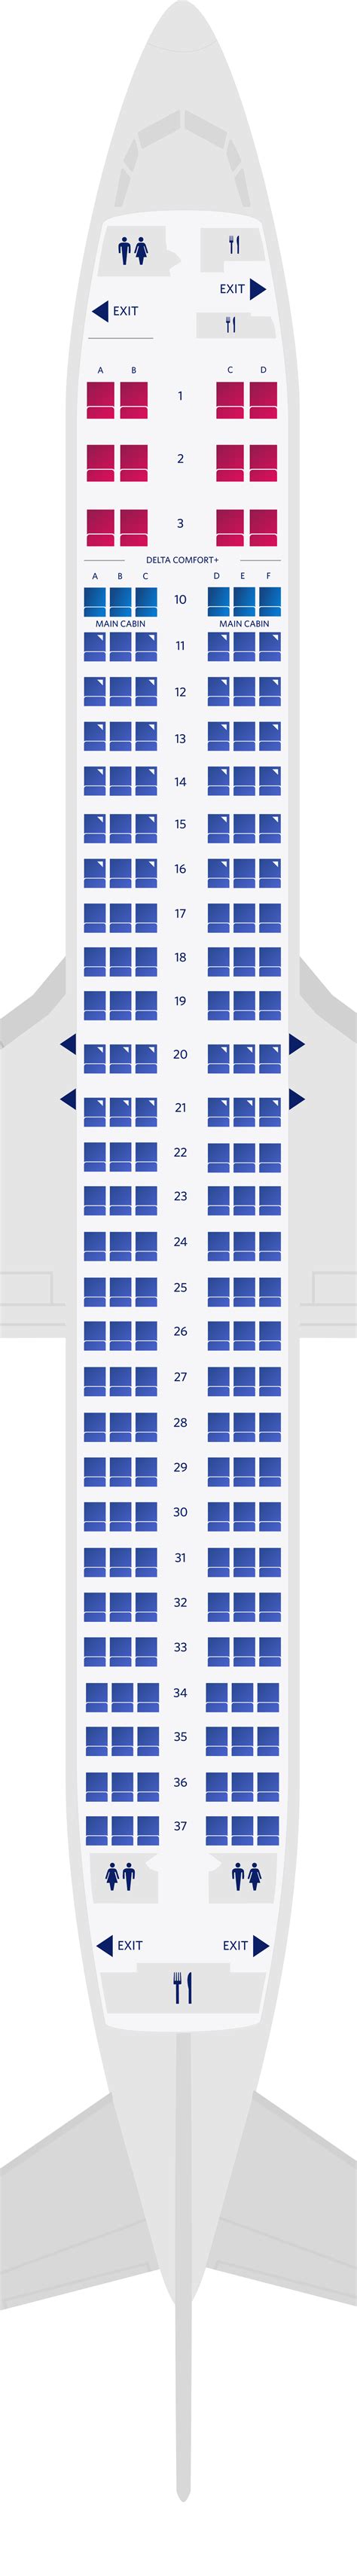 Boeing 737 800 Jet Delta Seating Chart Elcho Table